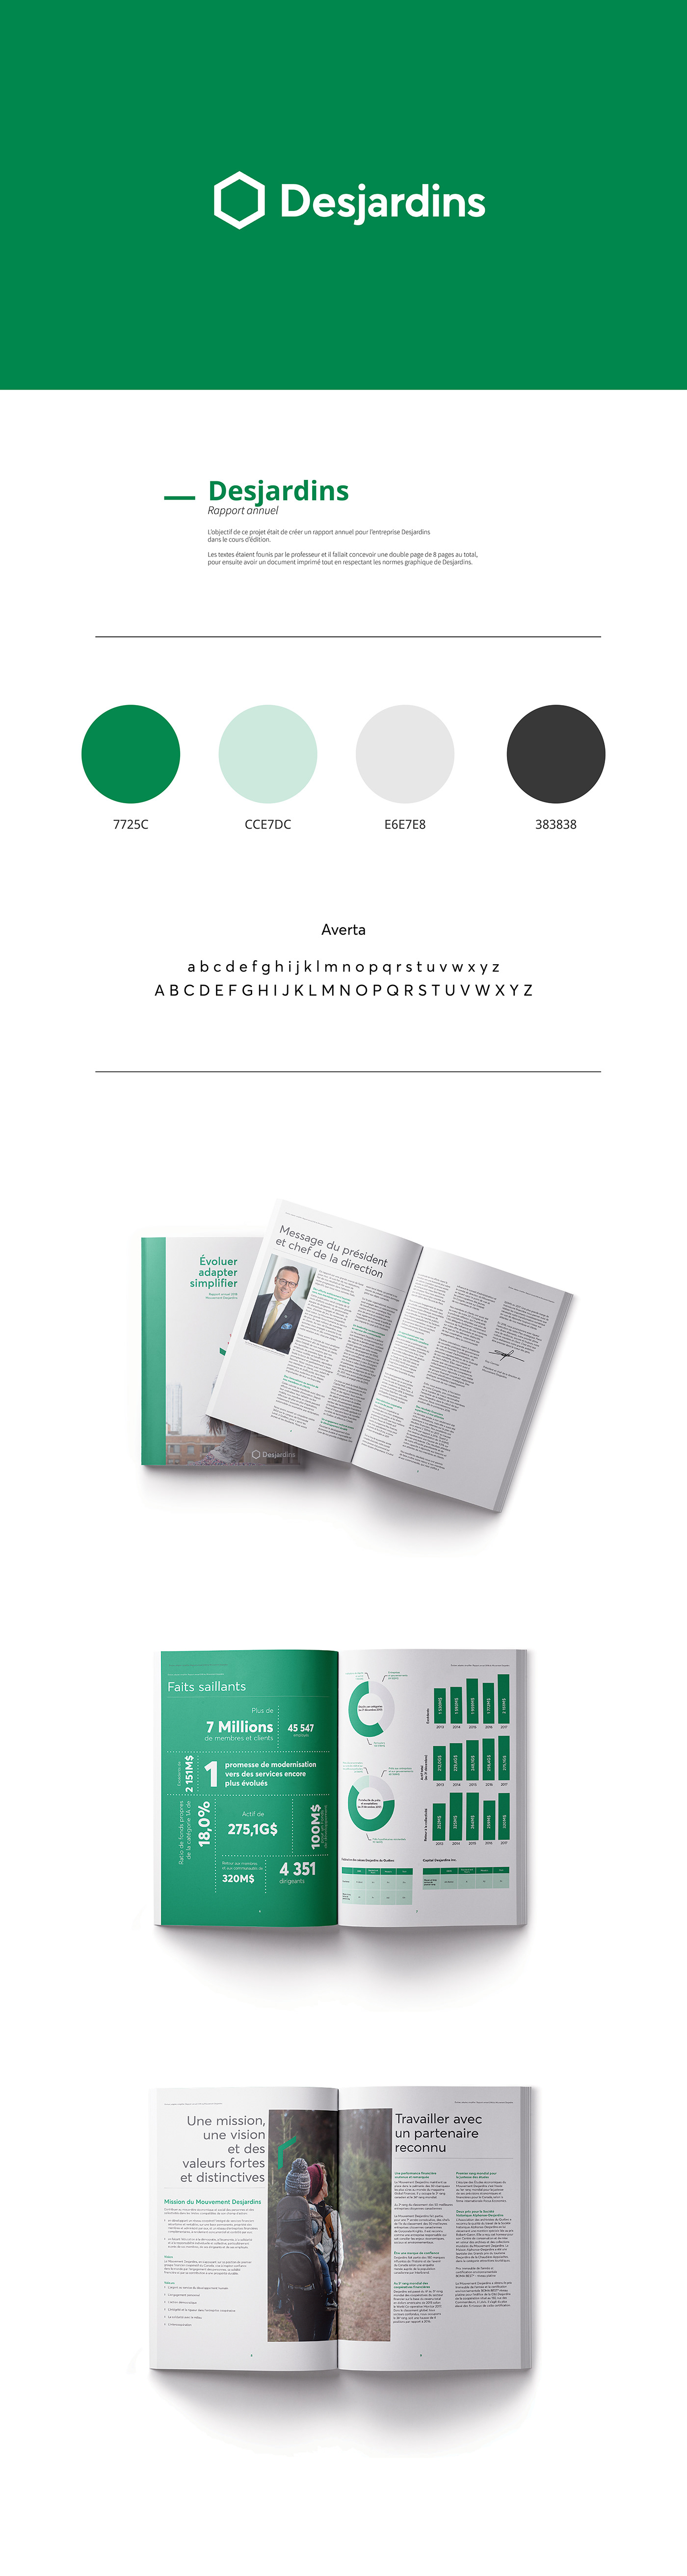 annual report Desjardins InDesign rapport annuel edition Layout miseenpage  